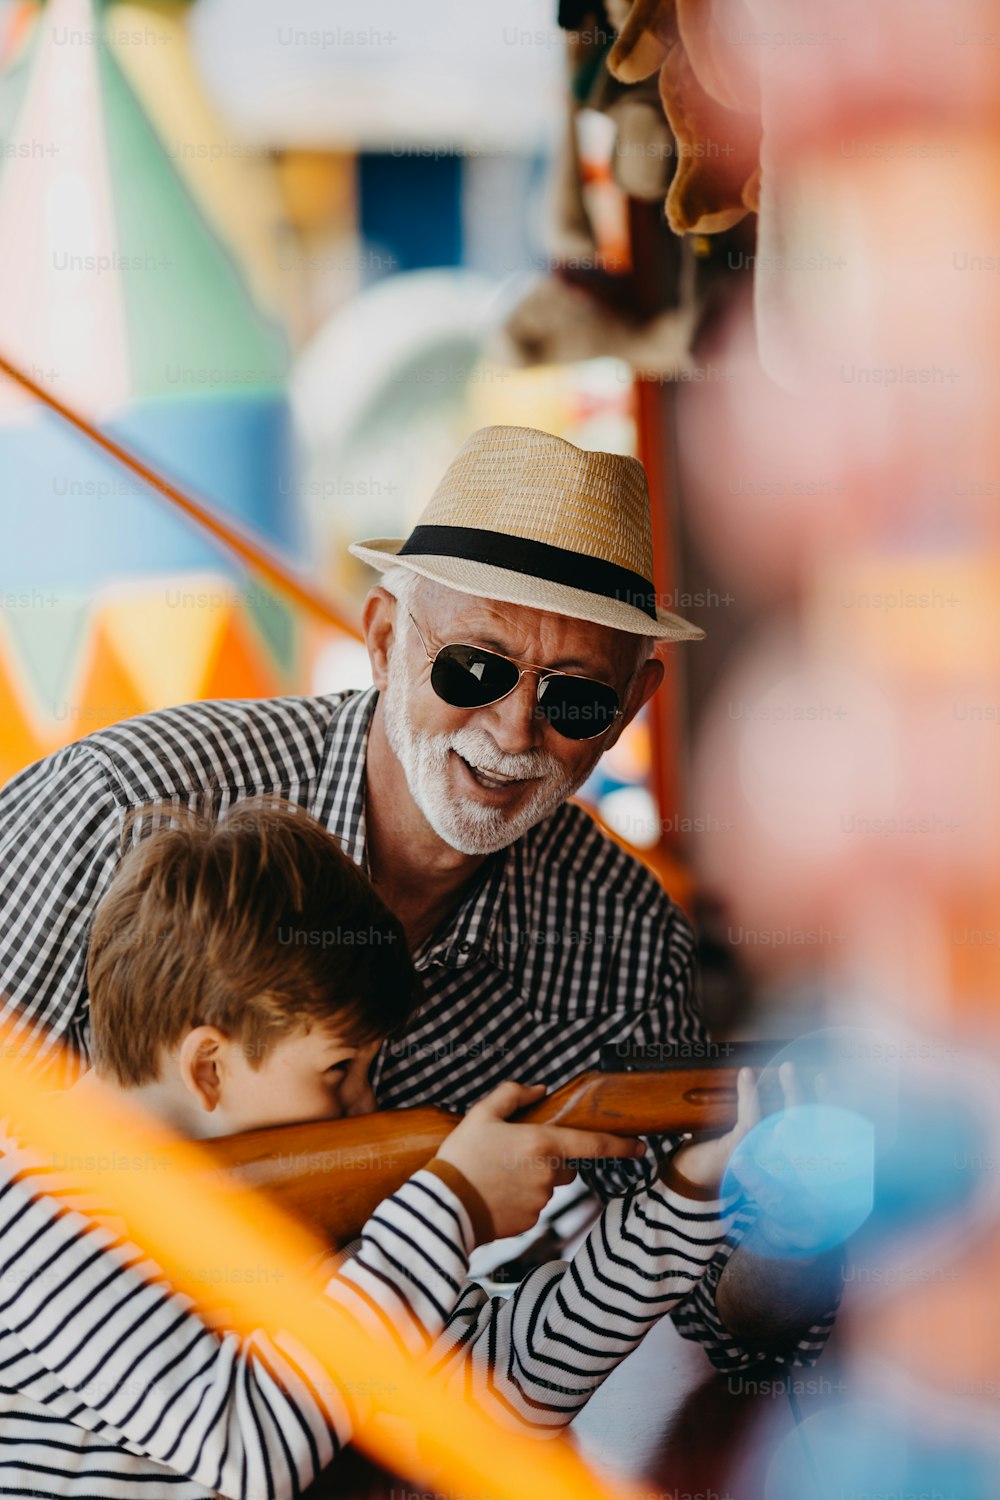 Grandfather and grandson having fun and spending good quality time together in amusement park. Kid shooting with air gun while grandpa helps him to win the prize.